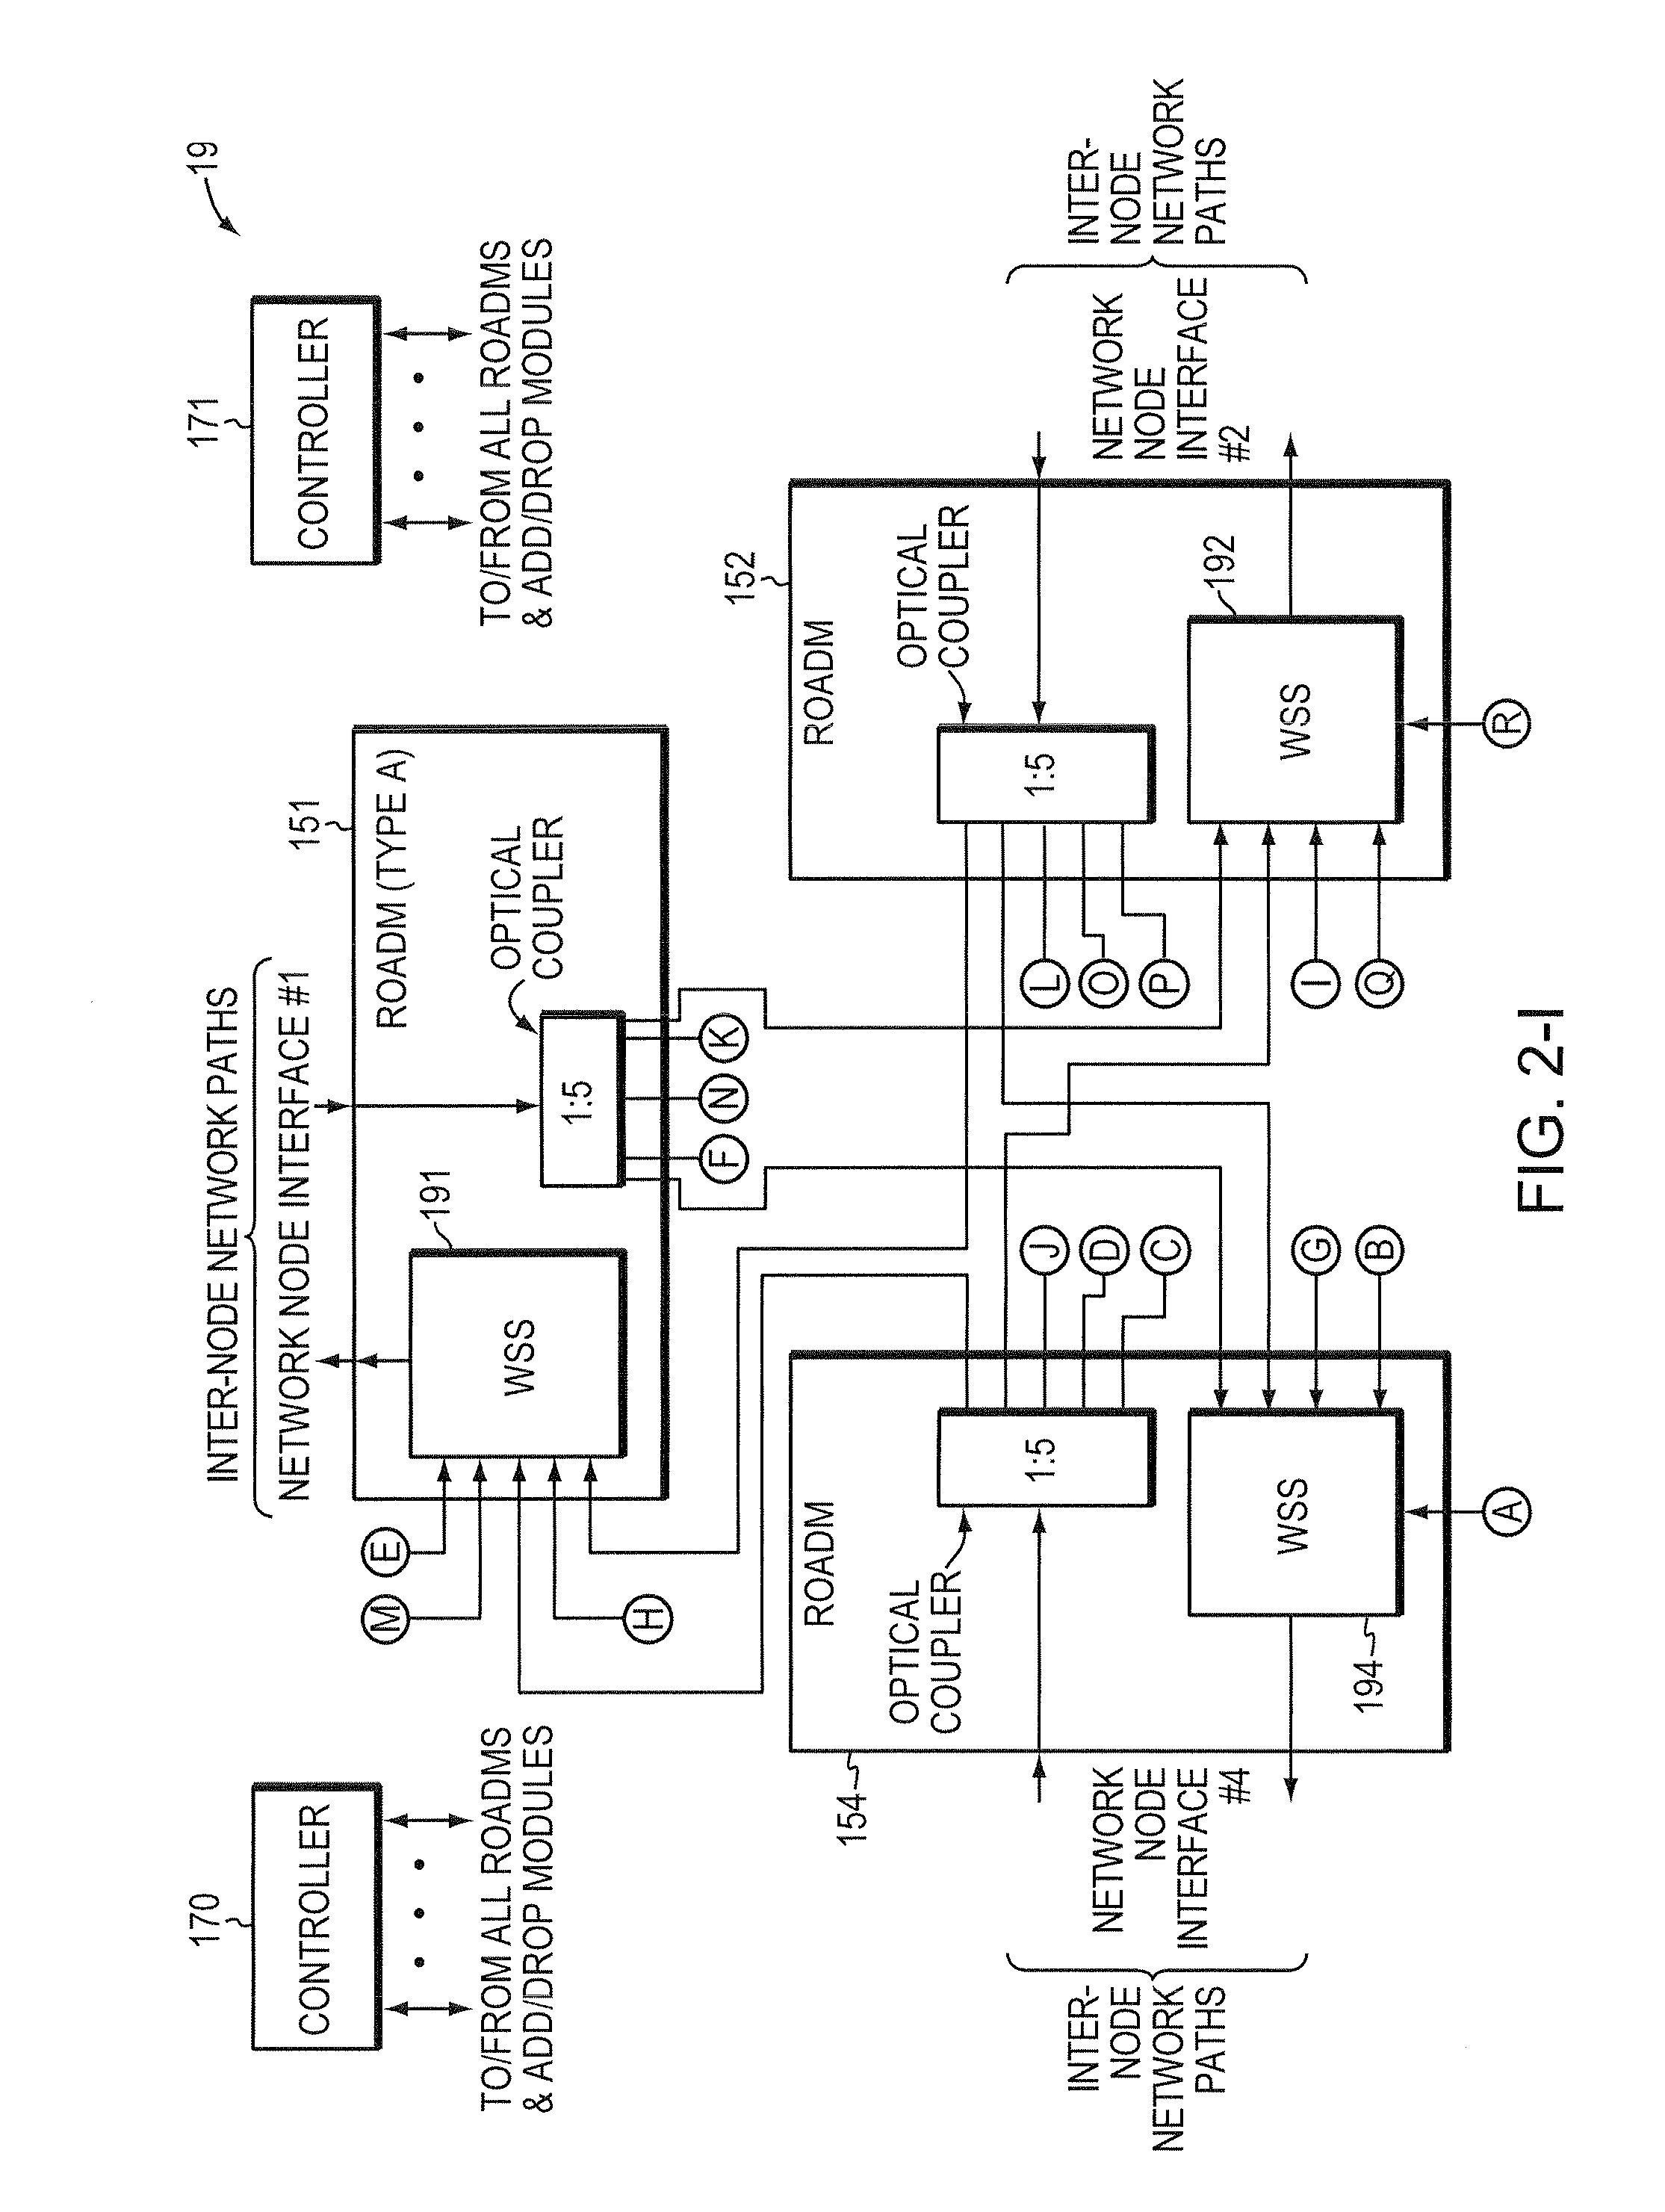 Methods and apparatus for performing directionless and contentionless wavelength addition and subtraction